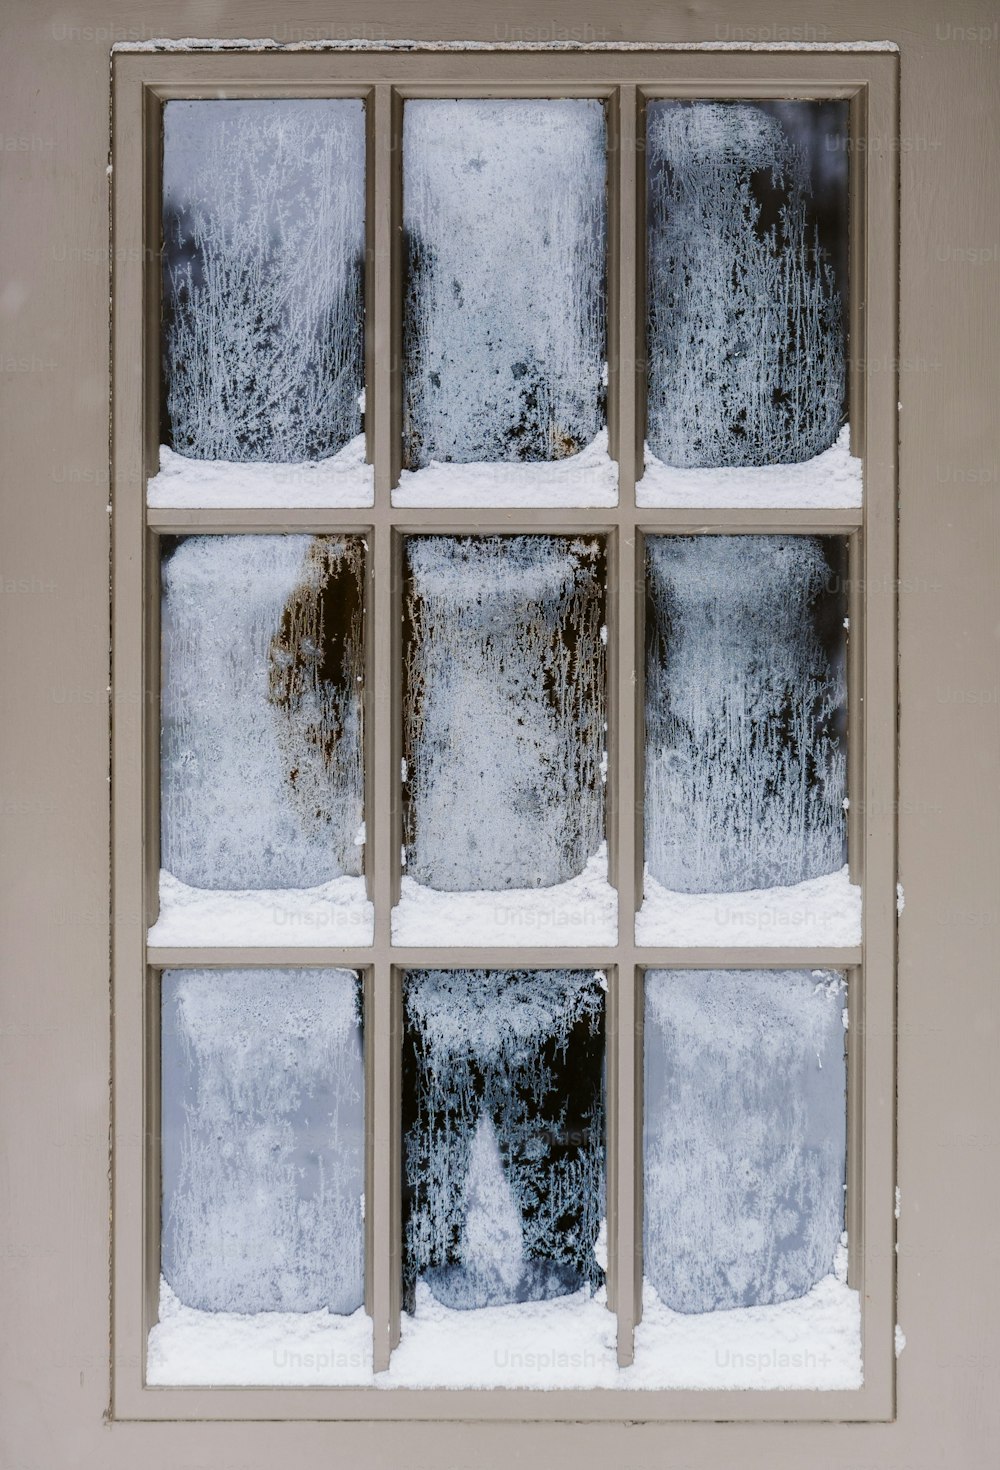 a window that has snow on the outside of it